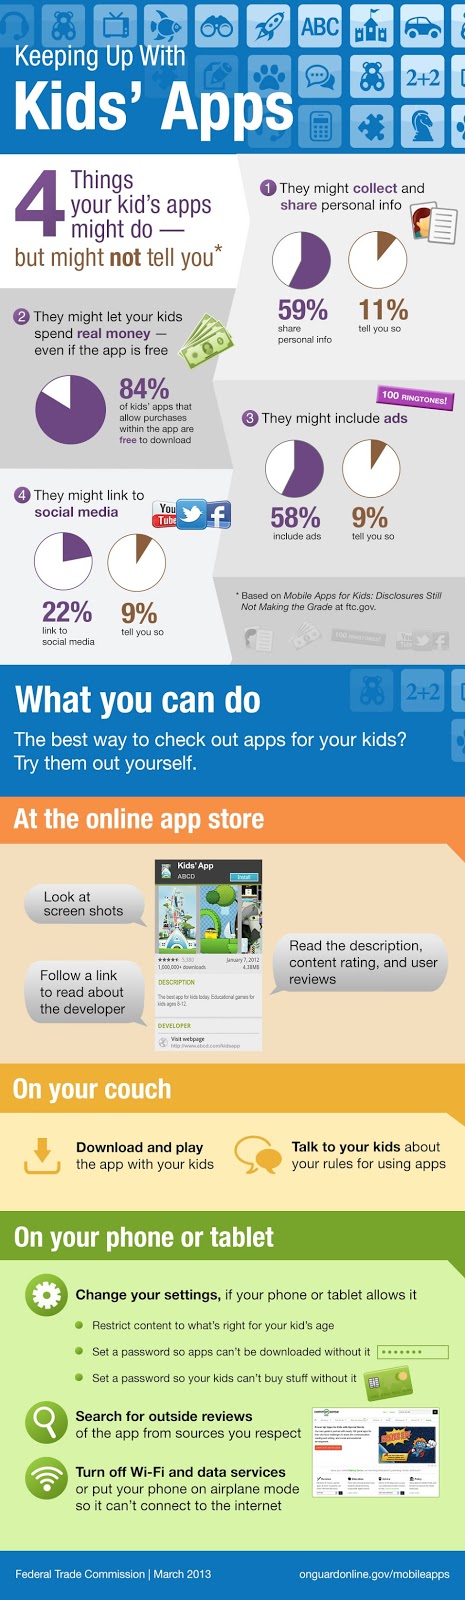 kids apps infographic